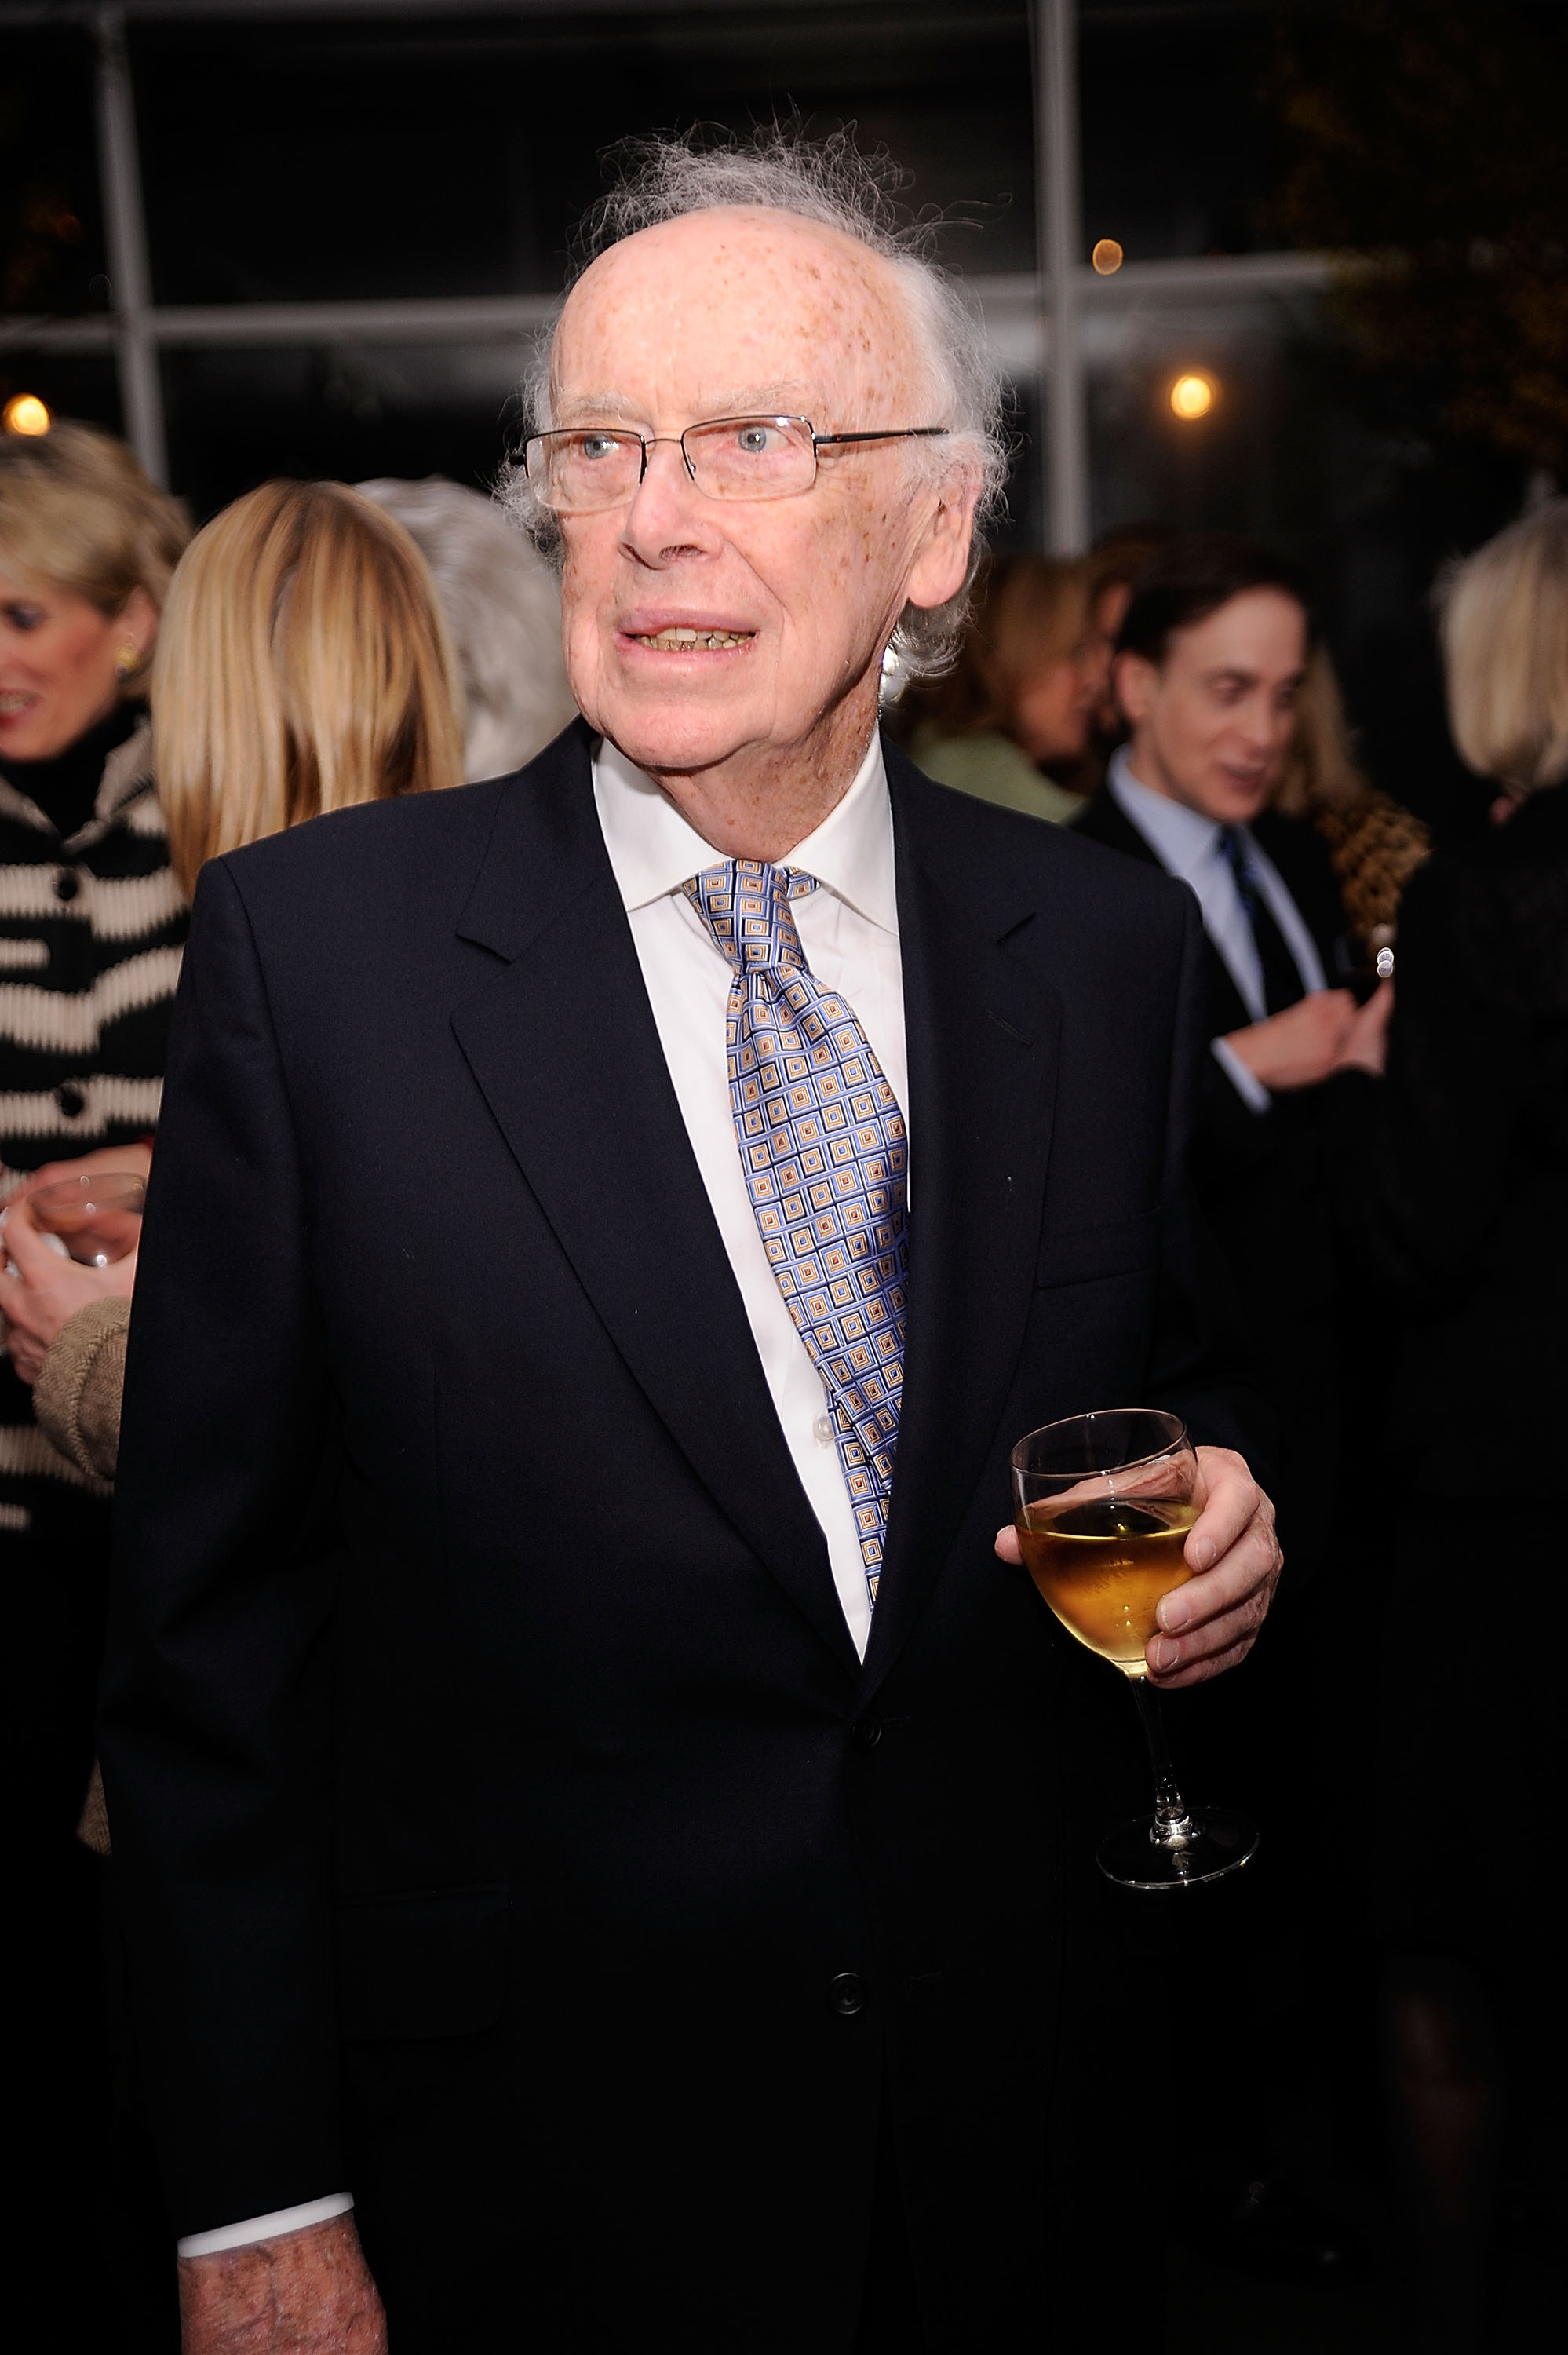 Noble Prize winner, Dr. James Watson, attends the Literacy Partners 26th annual Evening of Readings pre-gala kick-off at Michael's on March 1, 2010 in New York City. (Gary Gershoff&amp;mdash;WireImage)